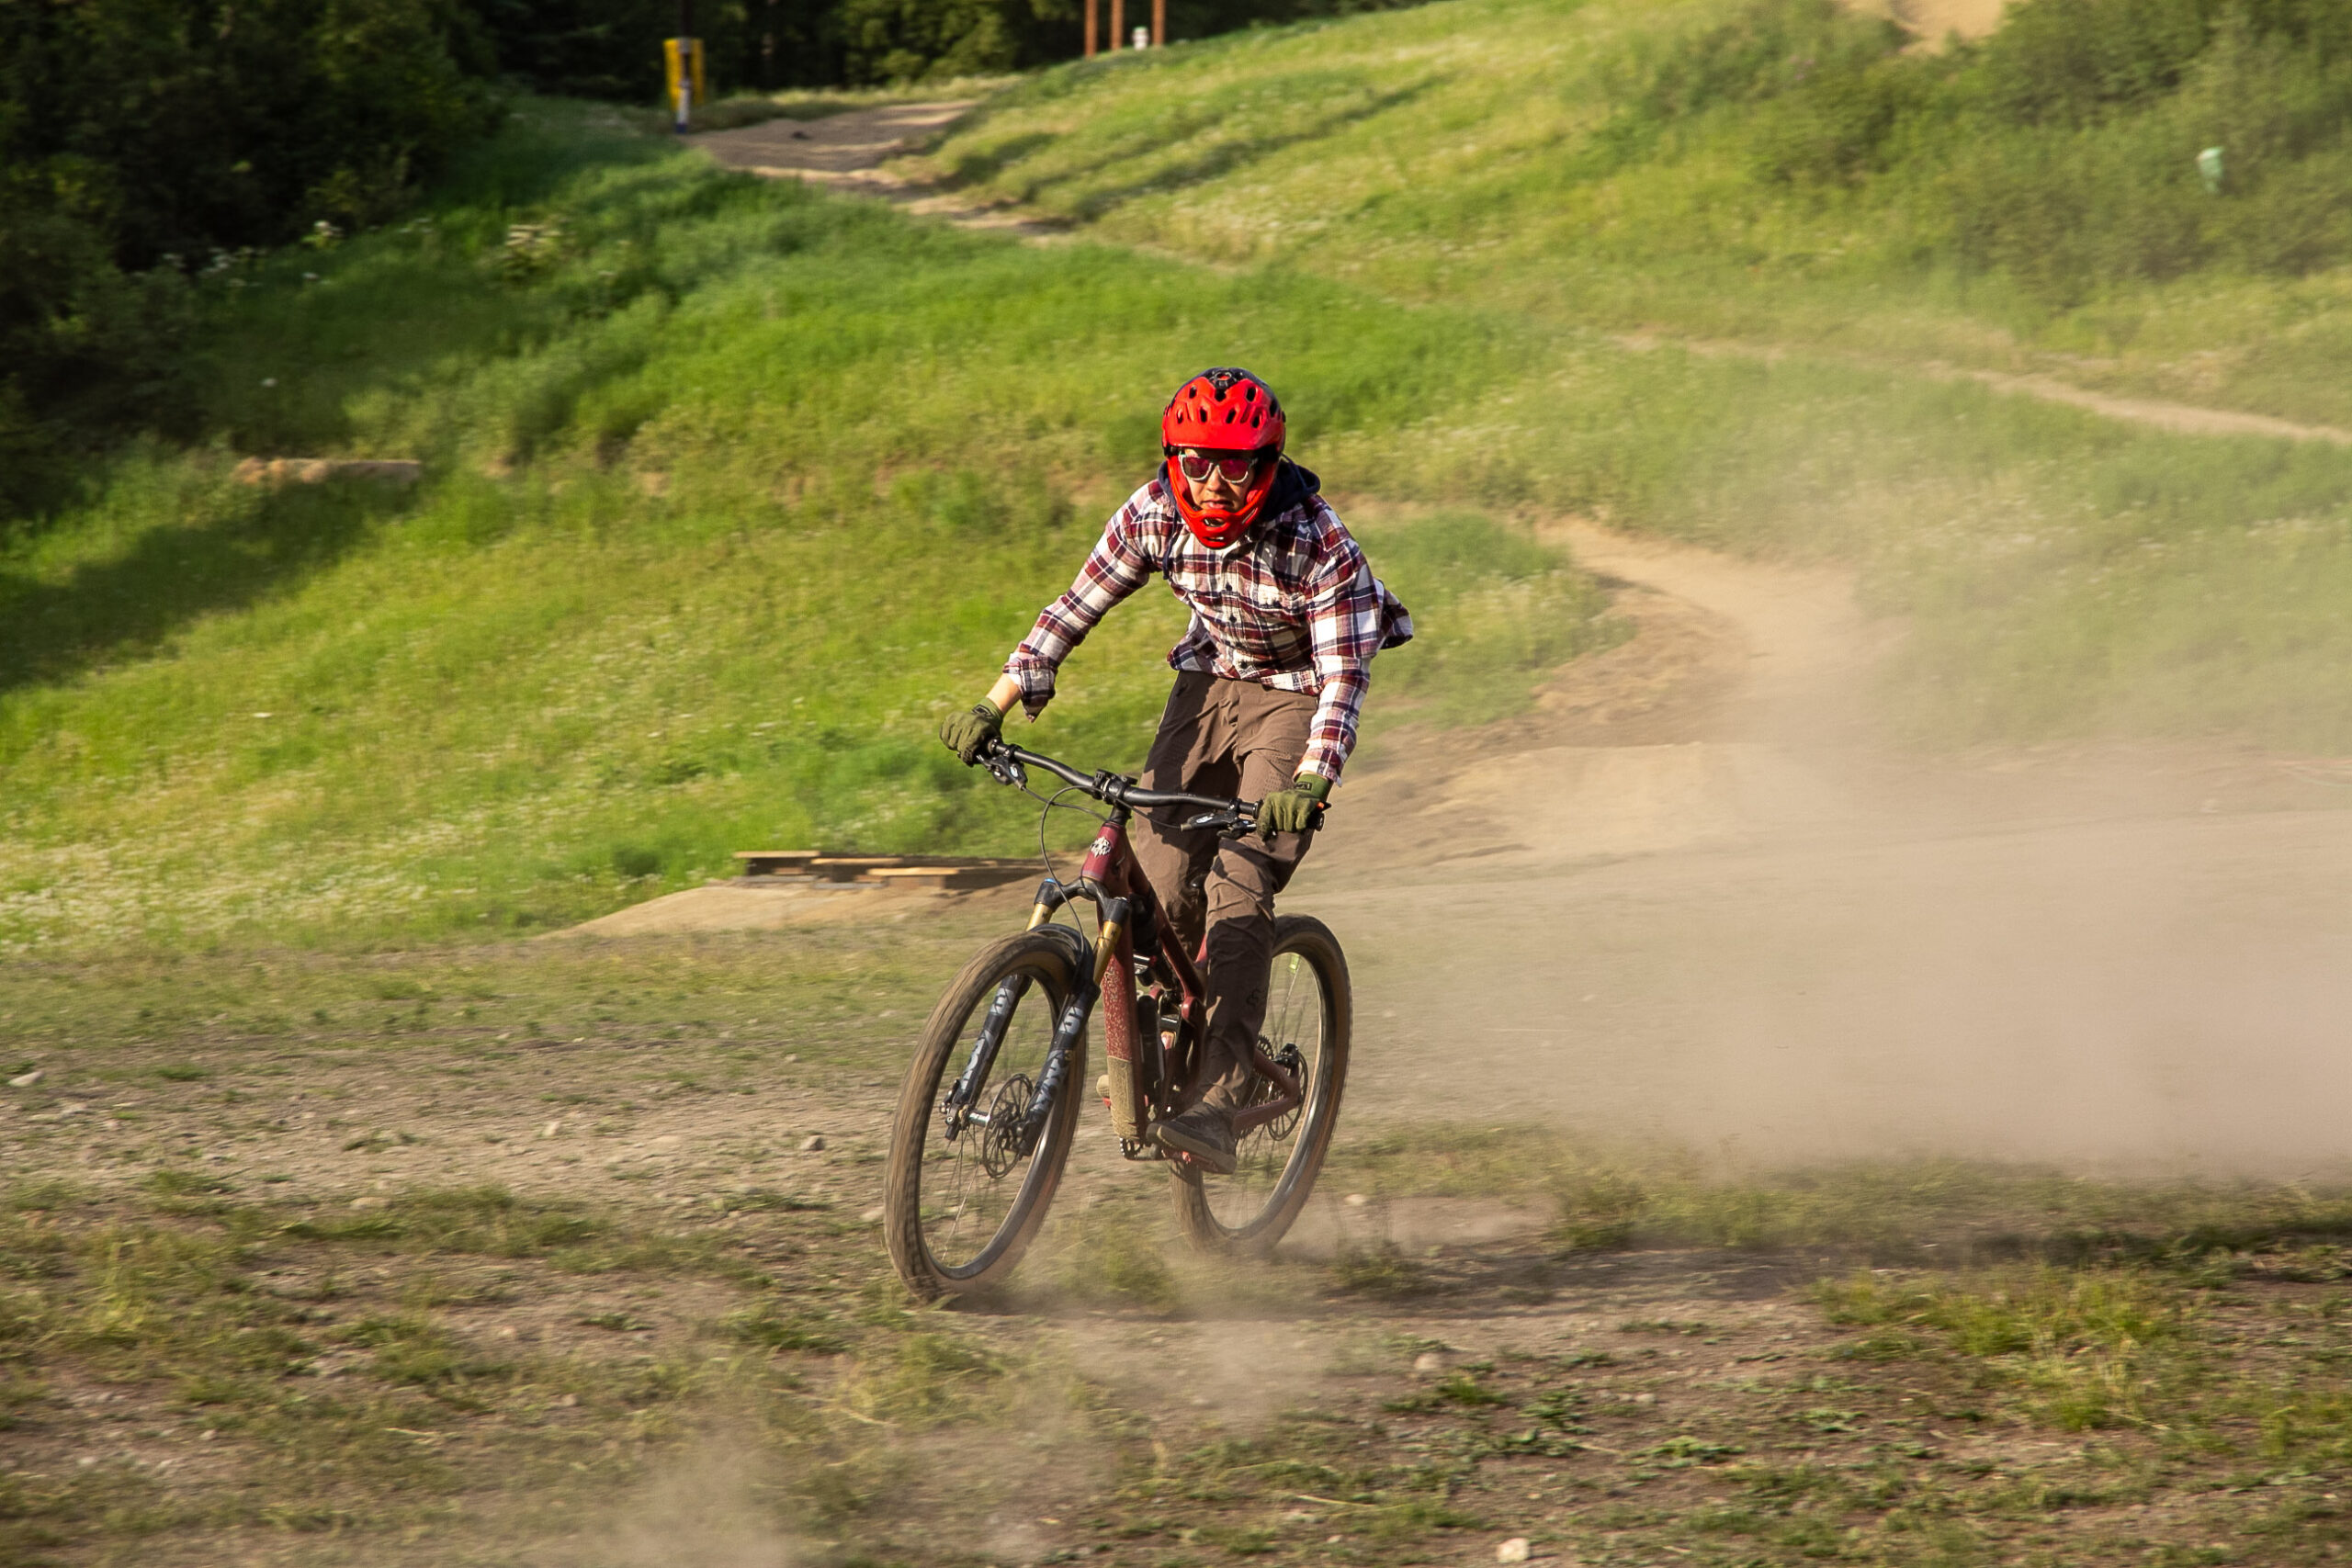 A teenage boy in a red bicycle helmet kicks up dust on a mountain bike.